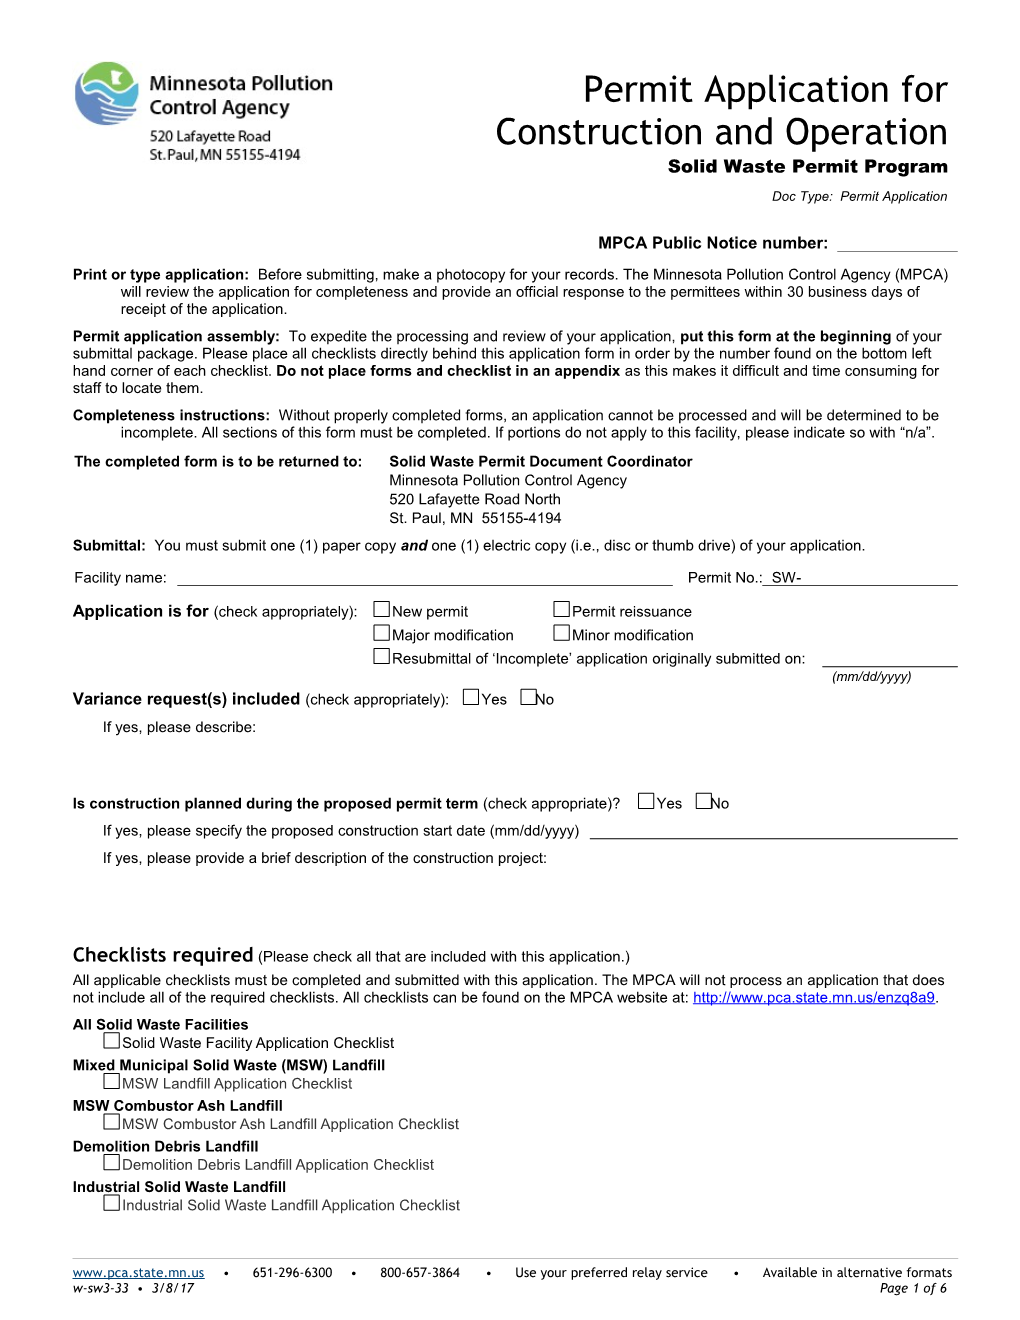 Permit Application for Construction and Operation - Form